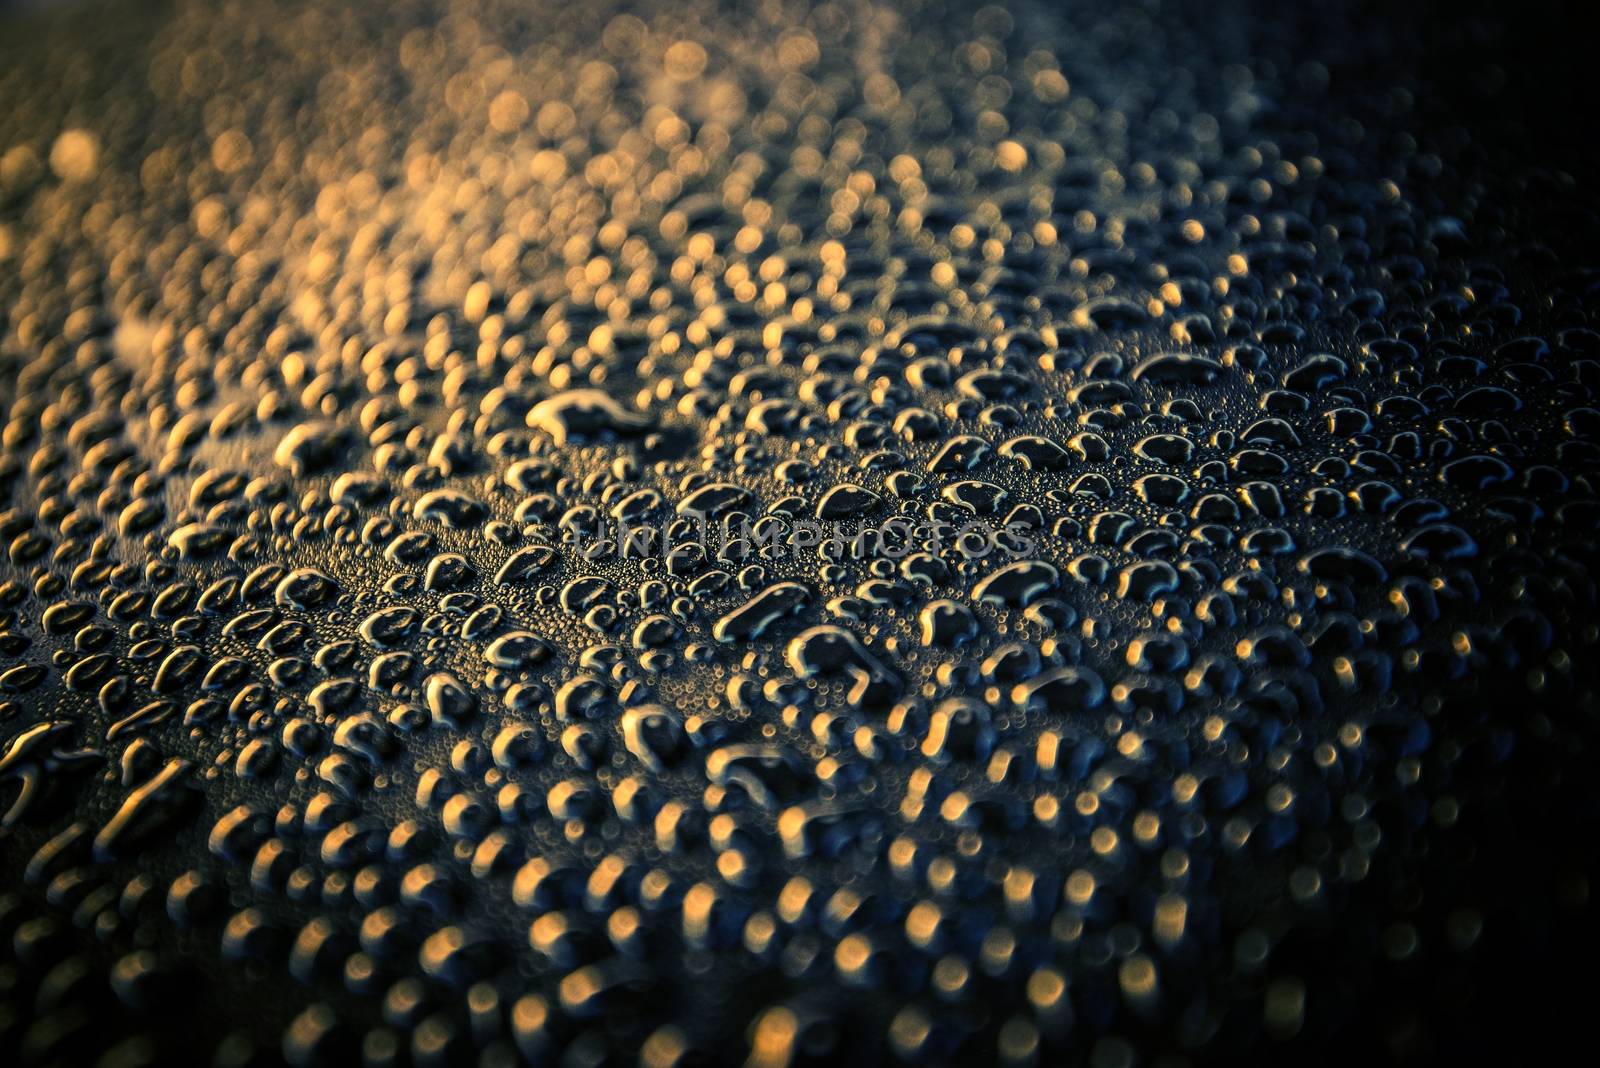 Water Drops on Car Body by welcomia